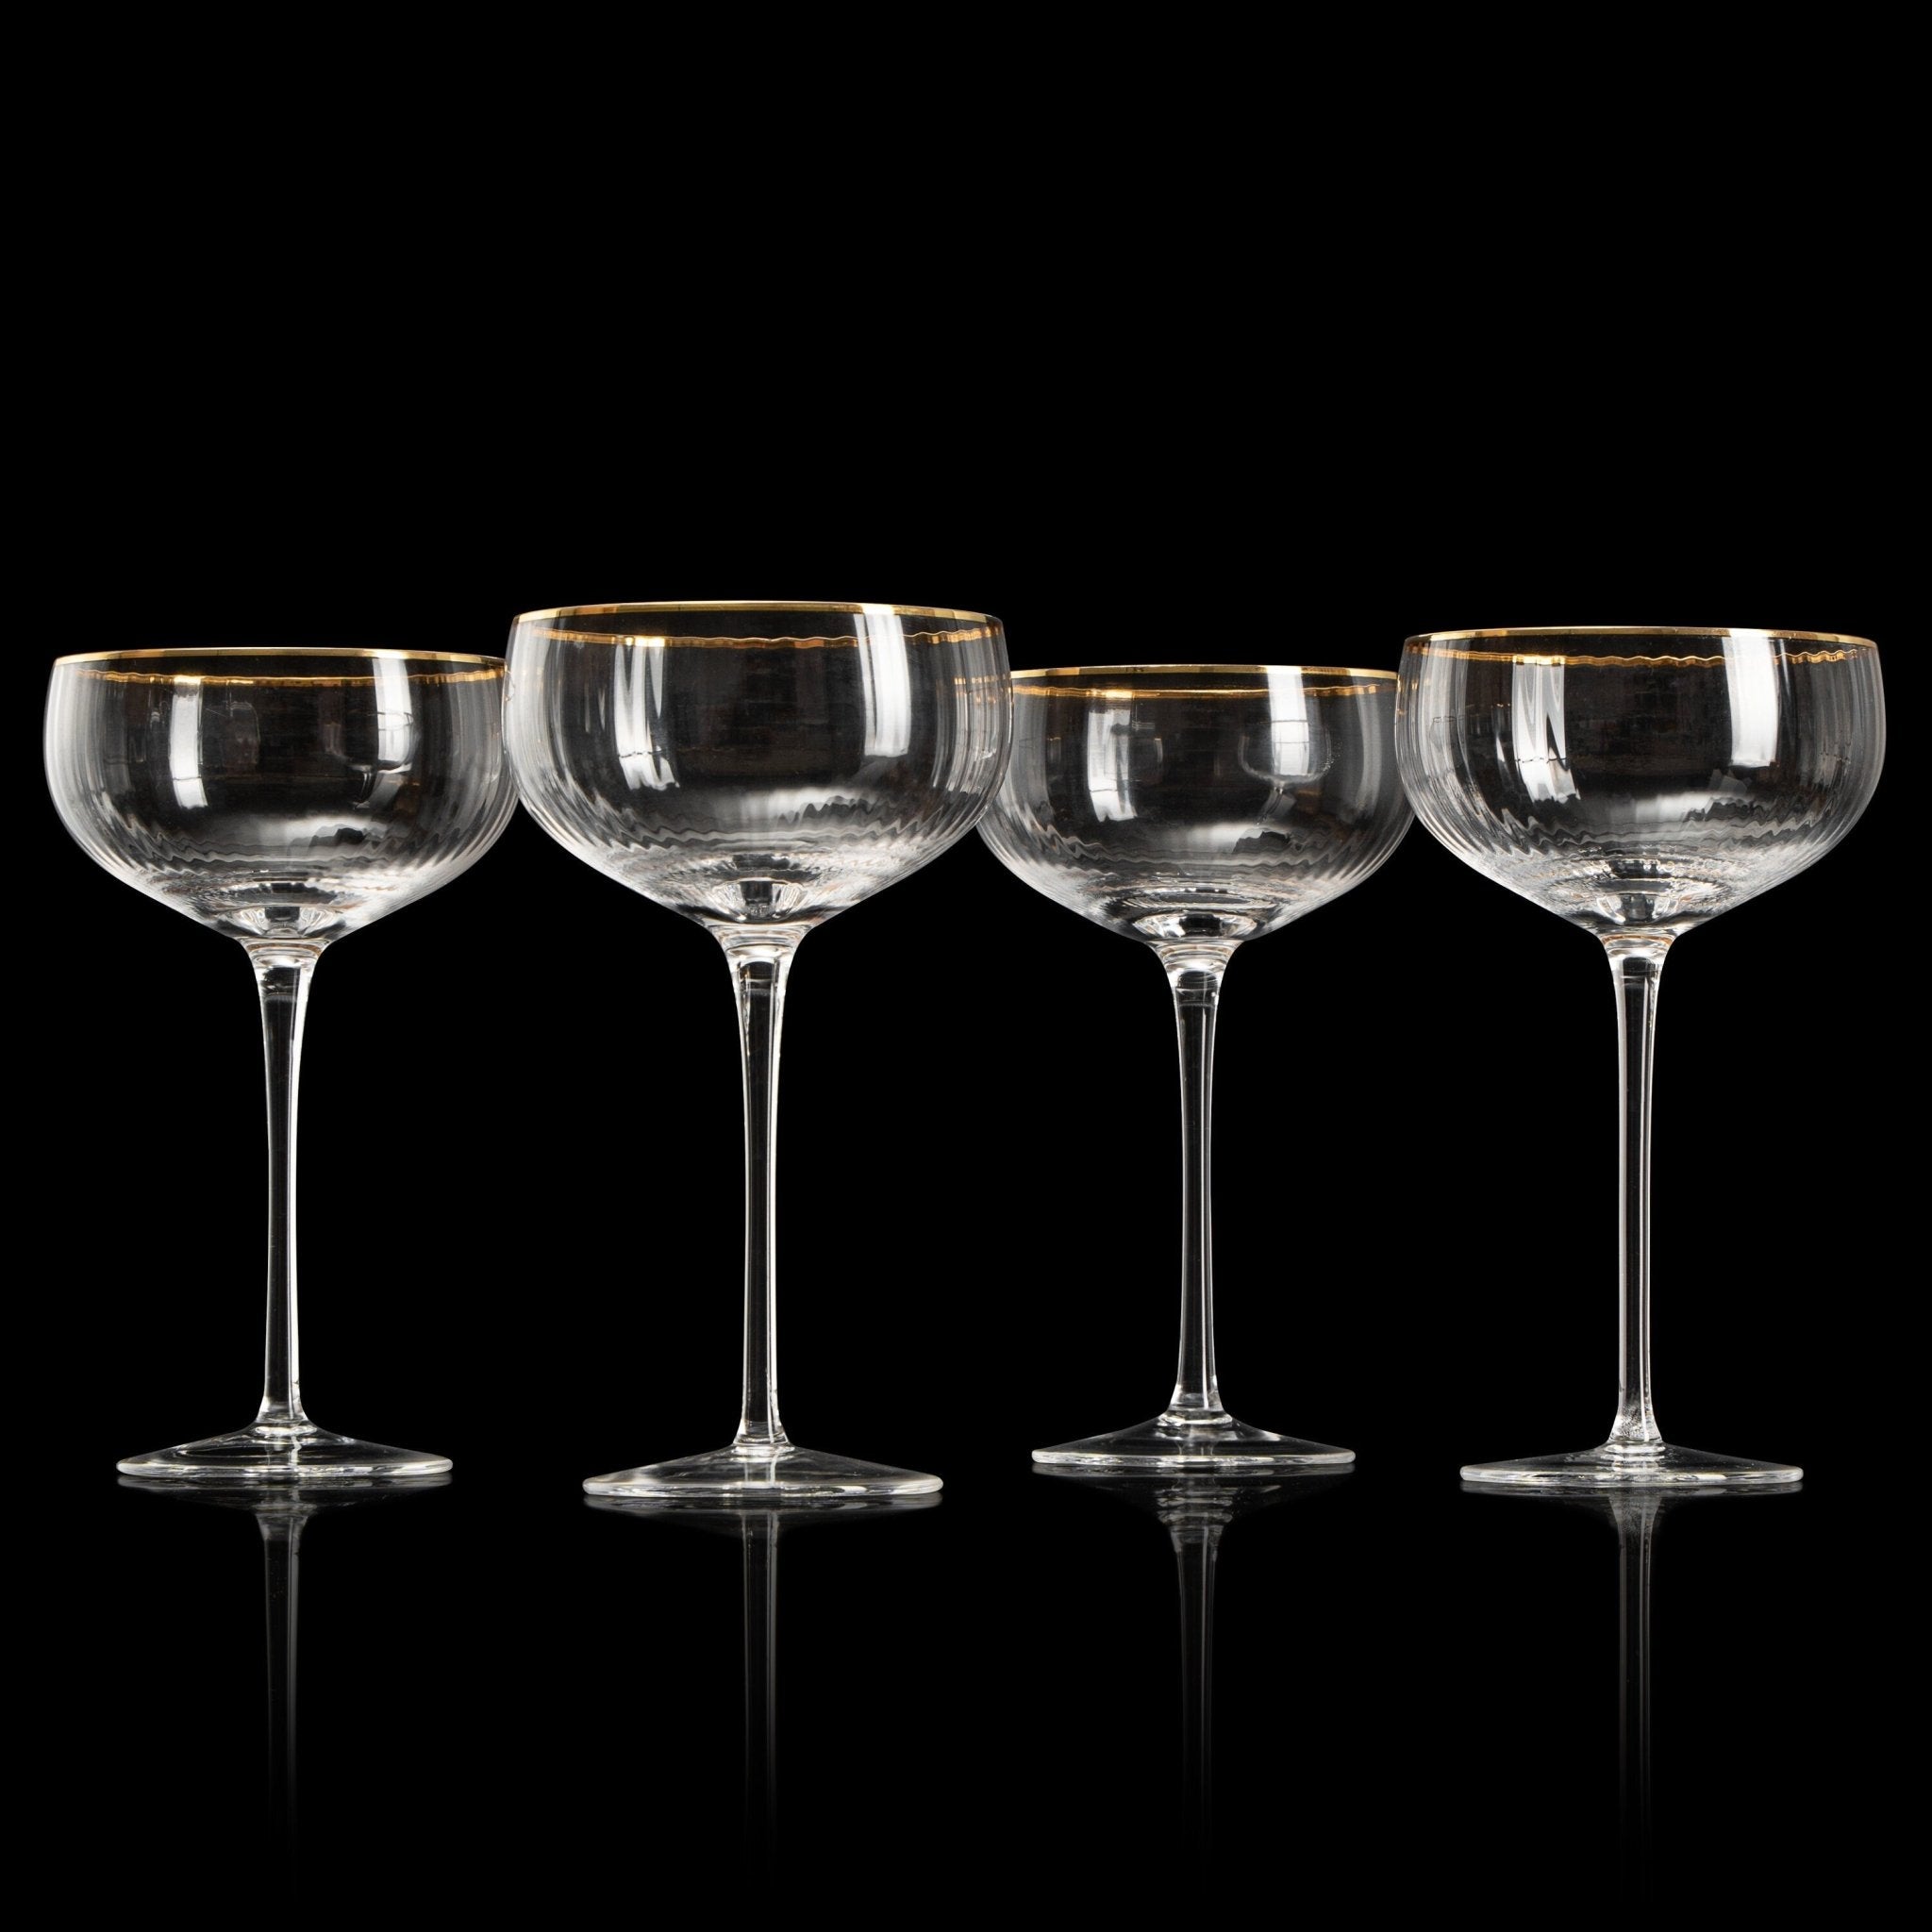 Set of 4 Gold Rim Coupe Glasses by The Wine Savant - The Kindness Cause